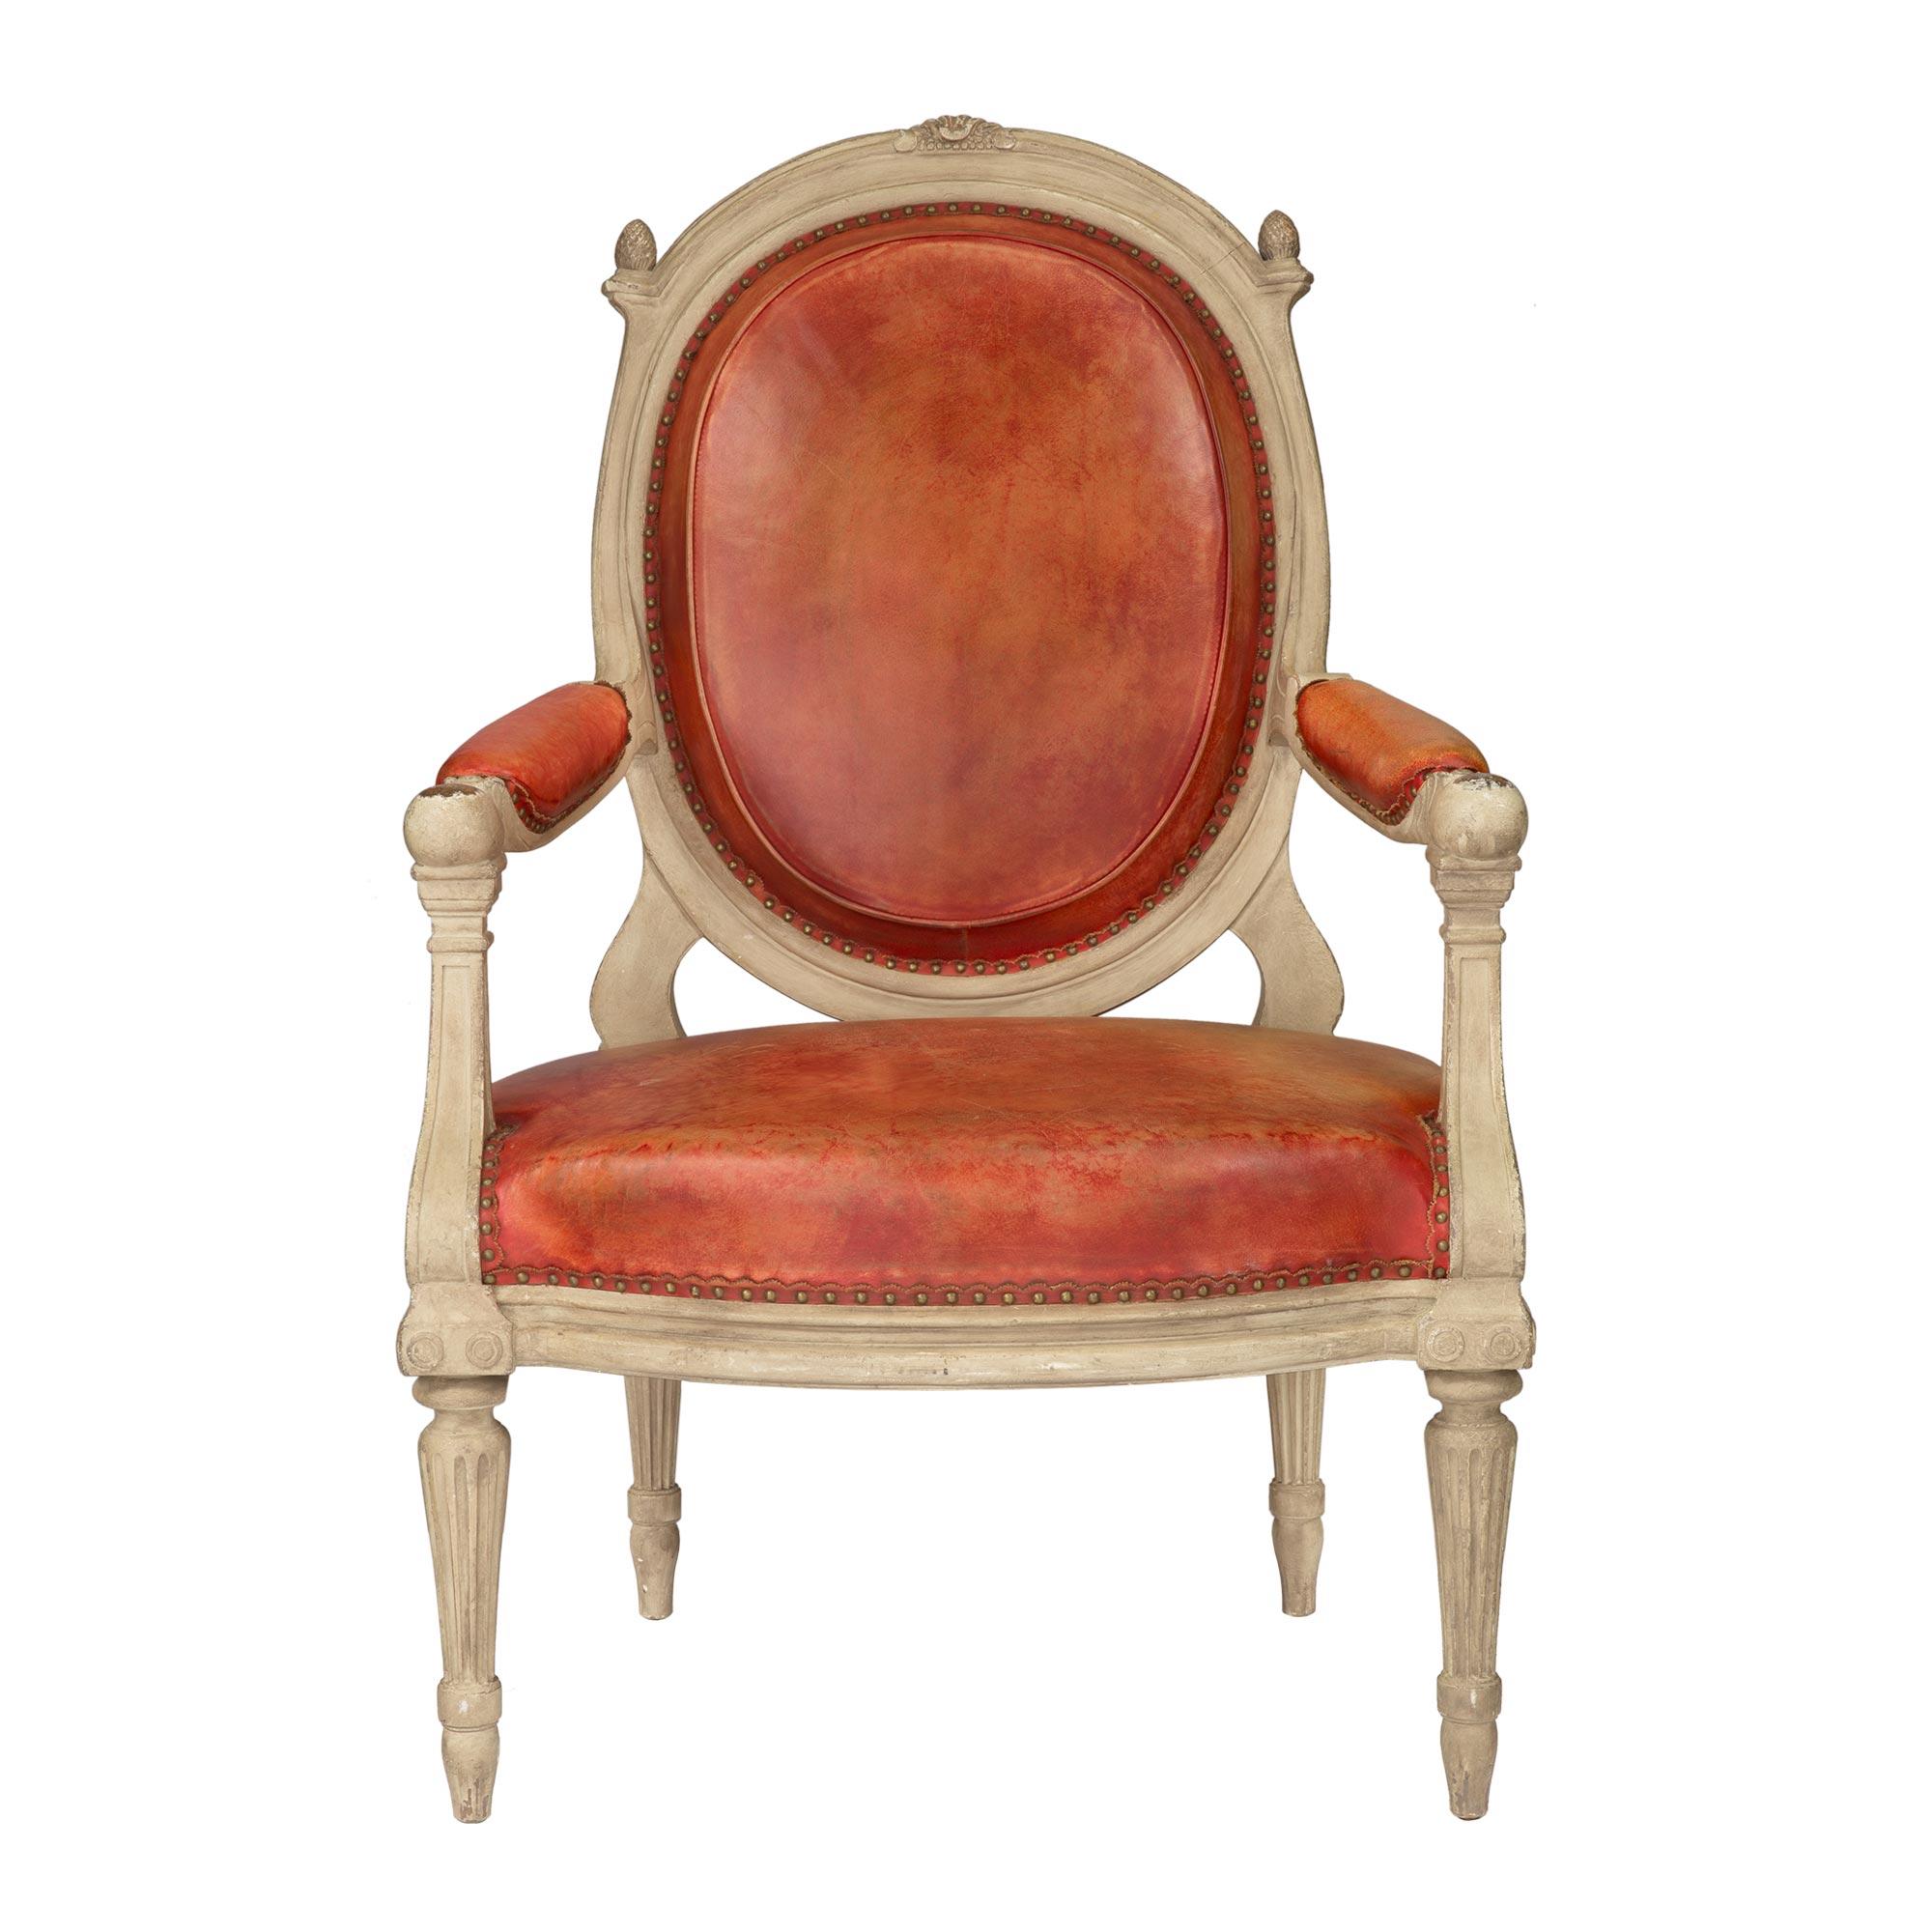 A striking and complete set of four Continental 19th century Louis XVI style patinated wood and red leather armchairs. Each beautiful chair is raised by elegant circular tapered fluted legs with finely carved topie shaped feet. Above each leg are